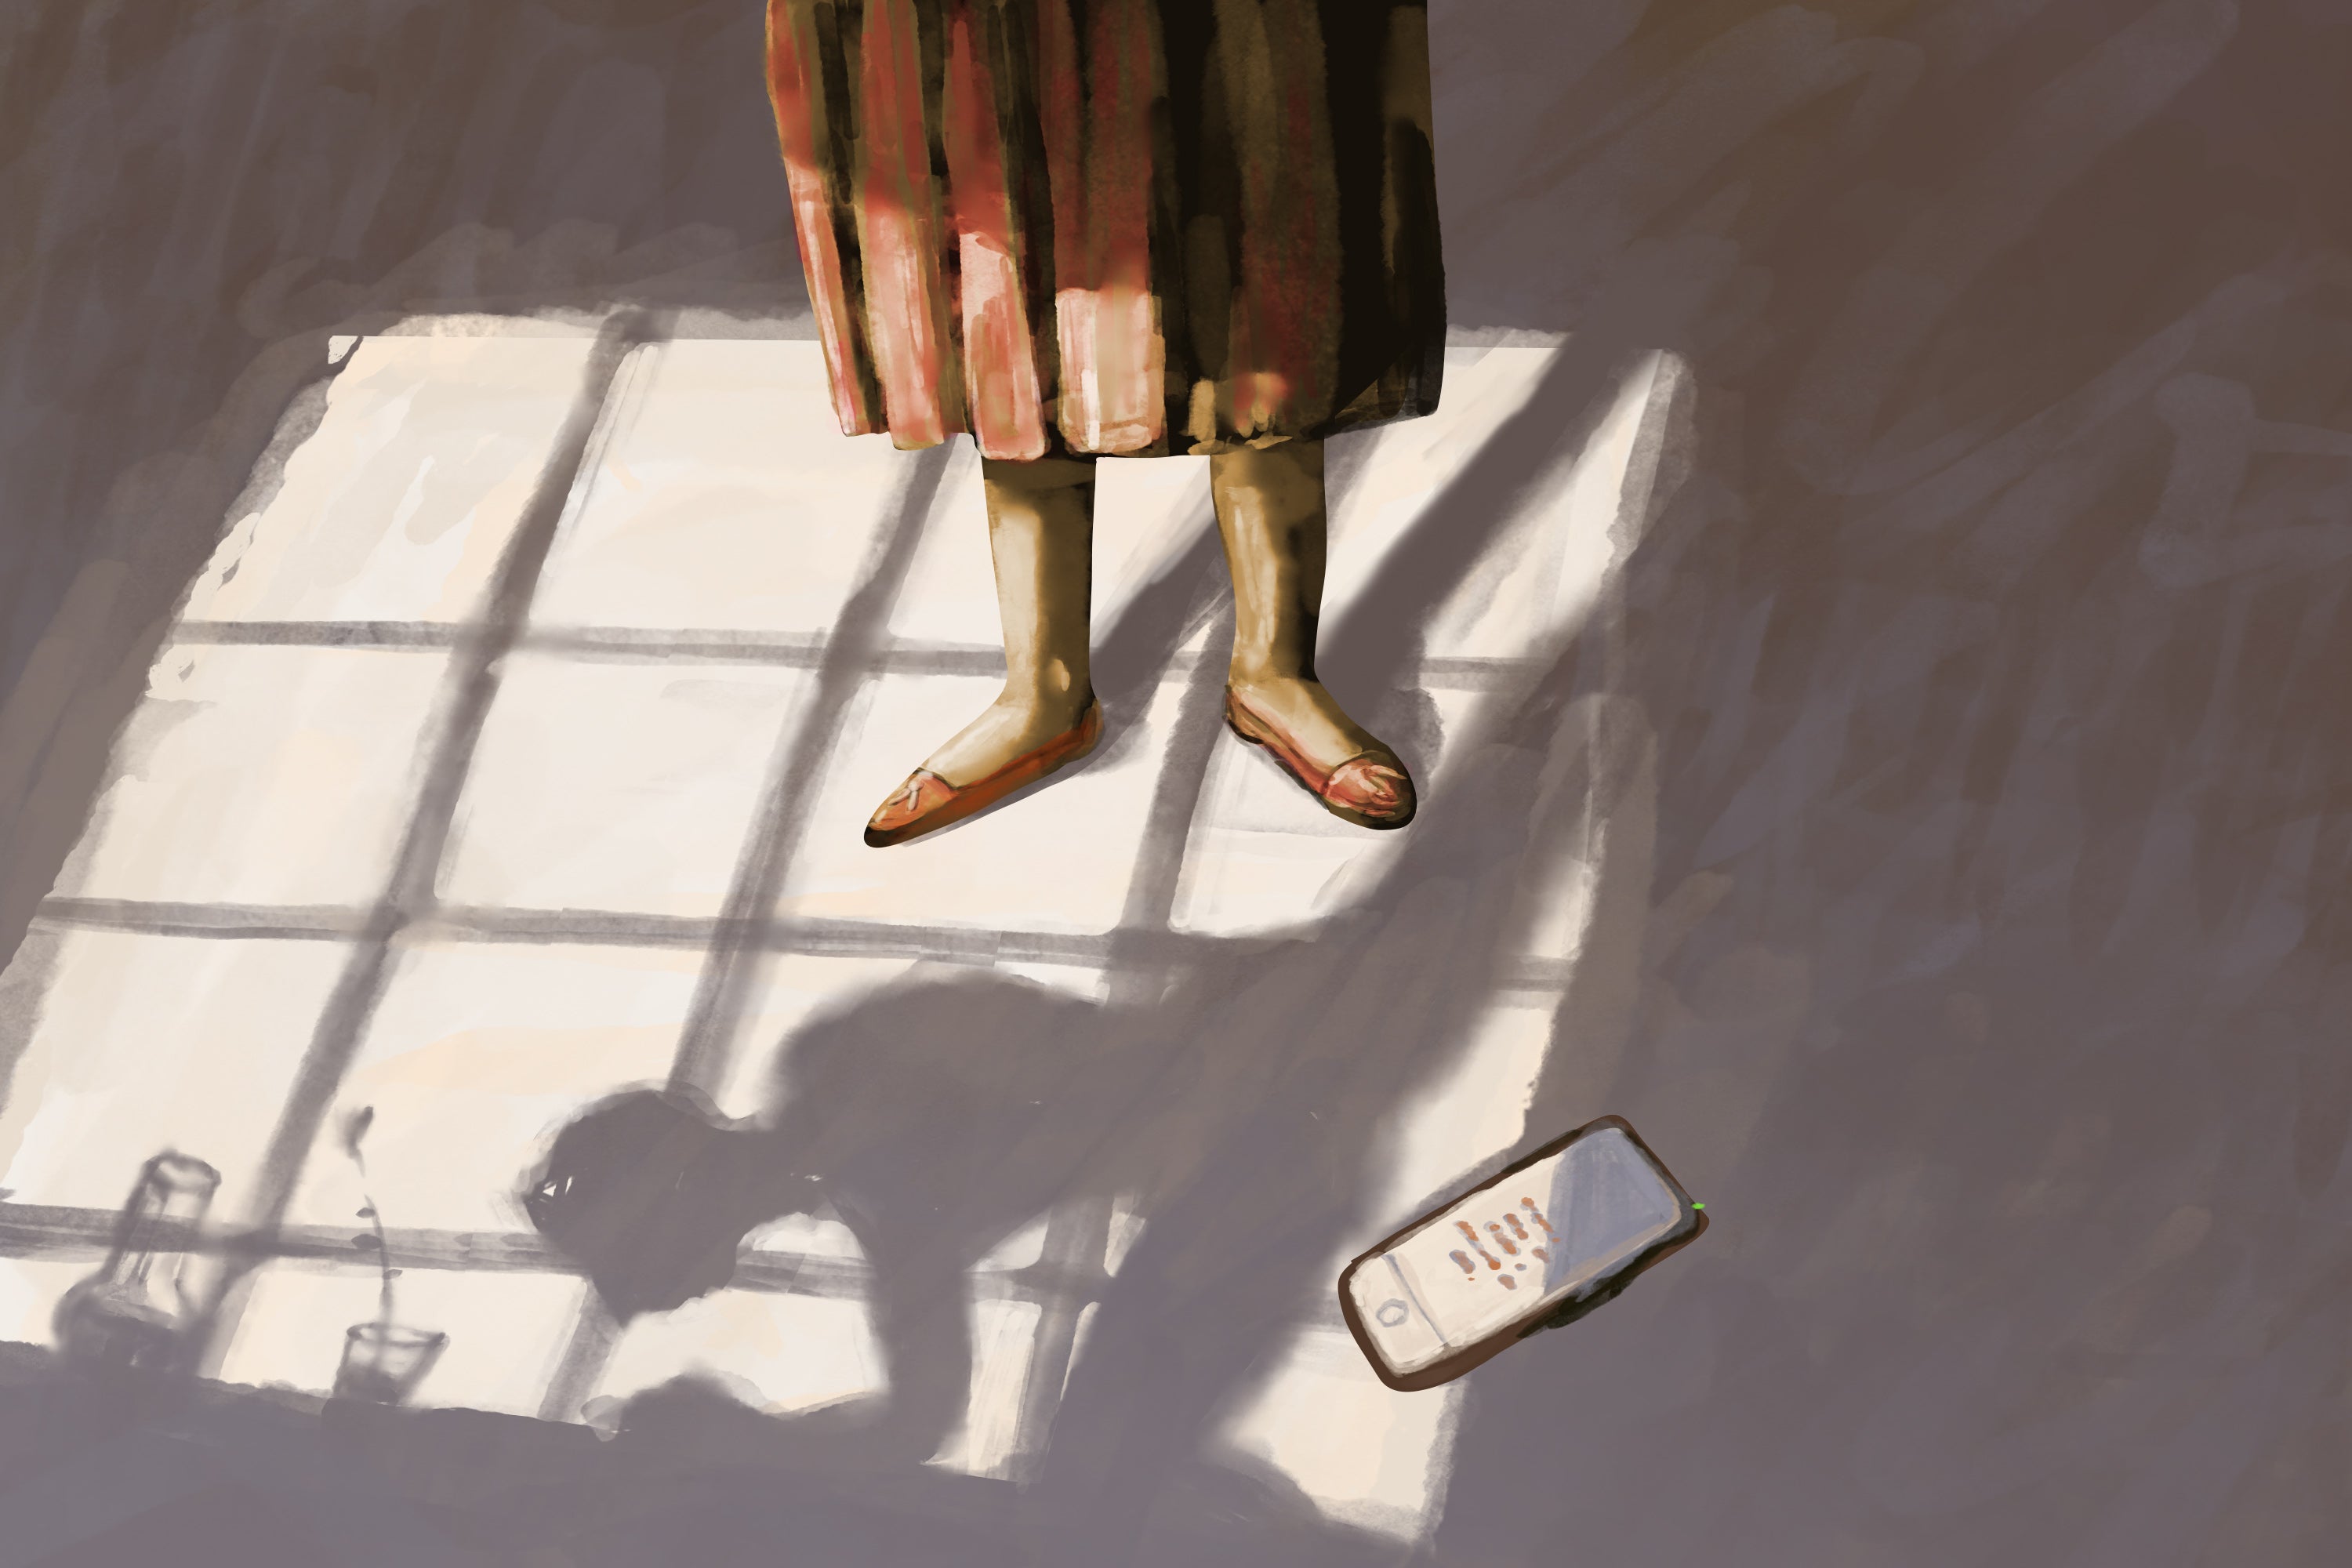 The shadow of a man on top of a table, contorting himself into an awkward position, while his phone lies on the floor, near the feet of his human partner.